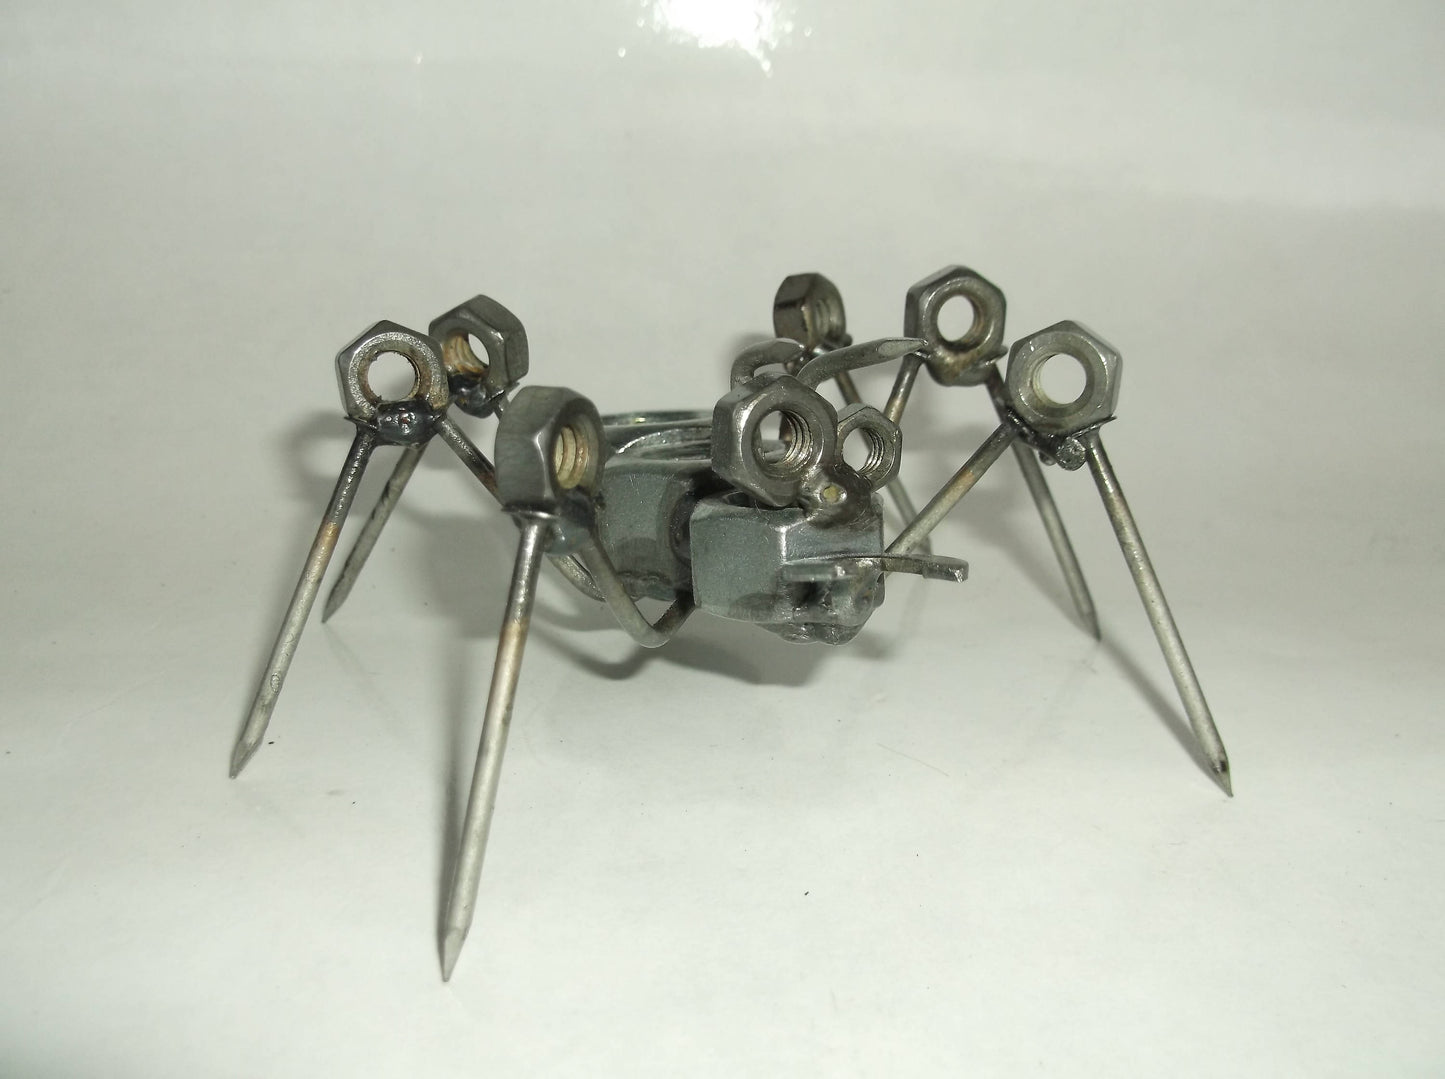 Ant Figurine, Recycled Metal Ant Sculpture Garden Stake